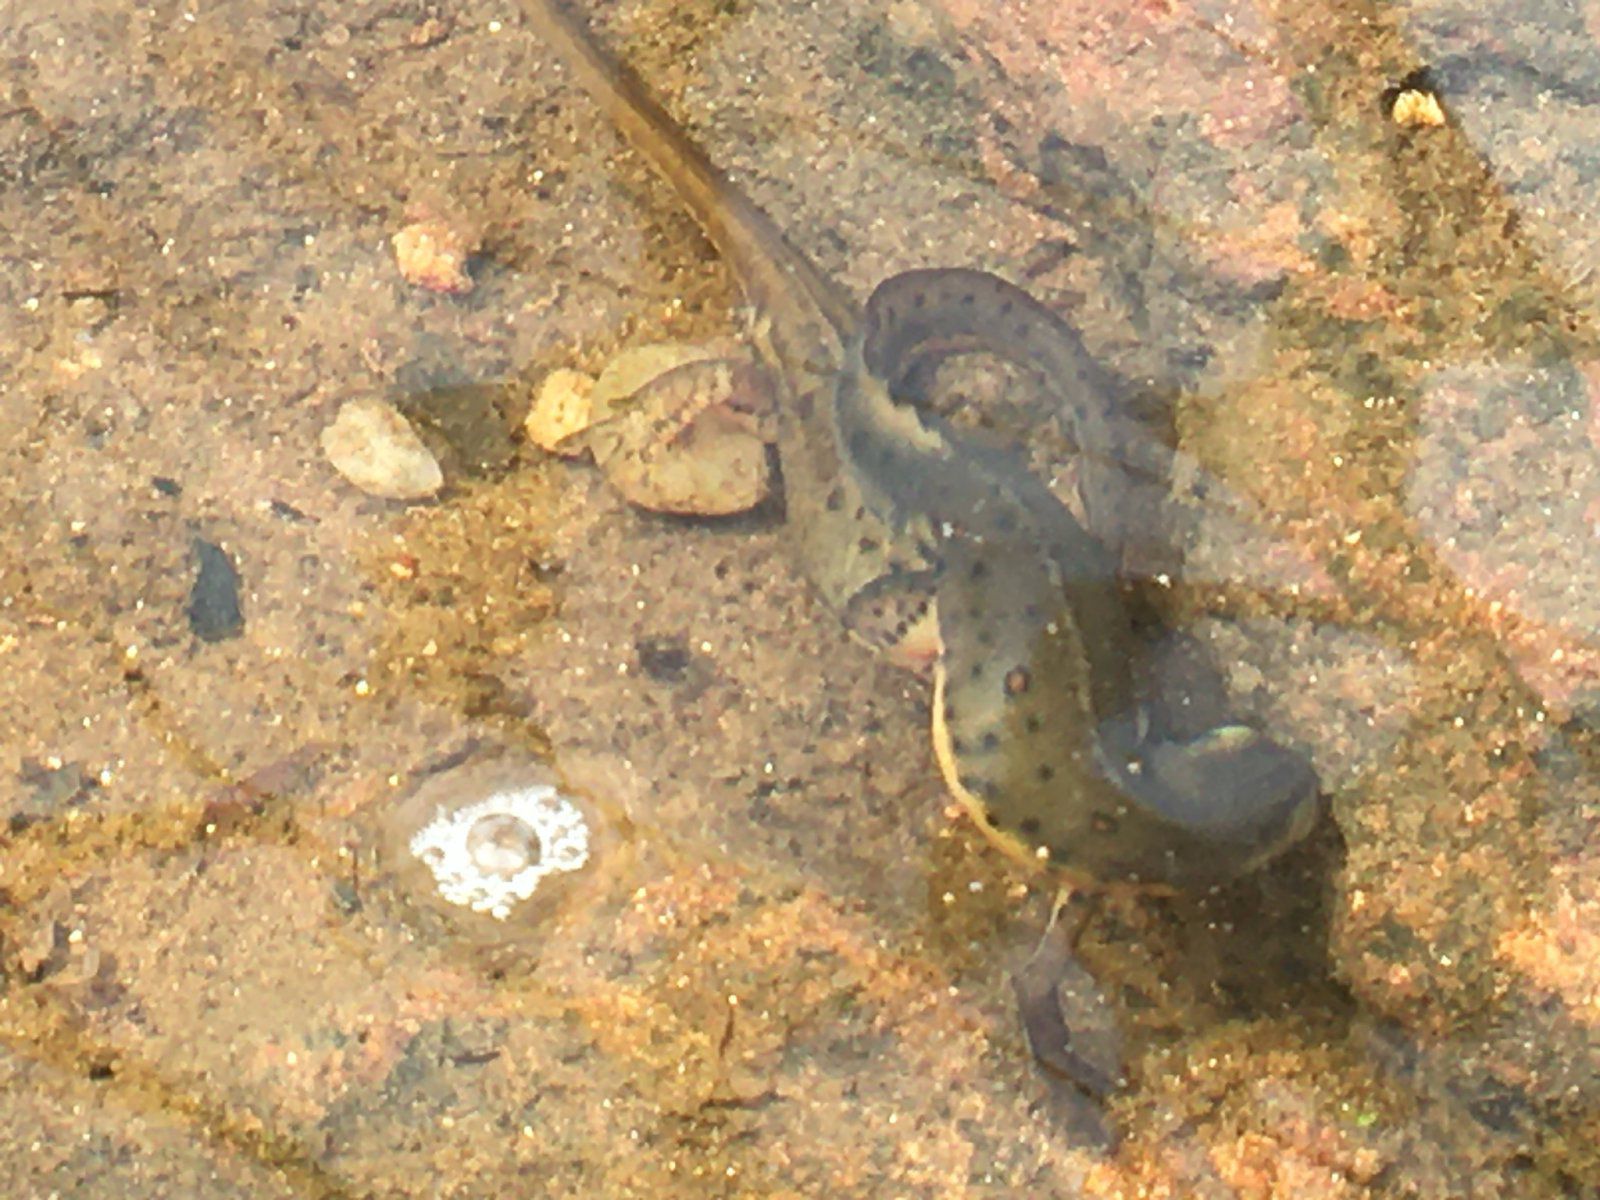 Eastern newts mating